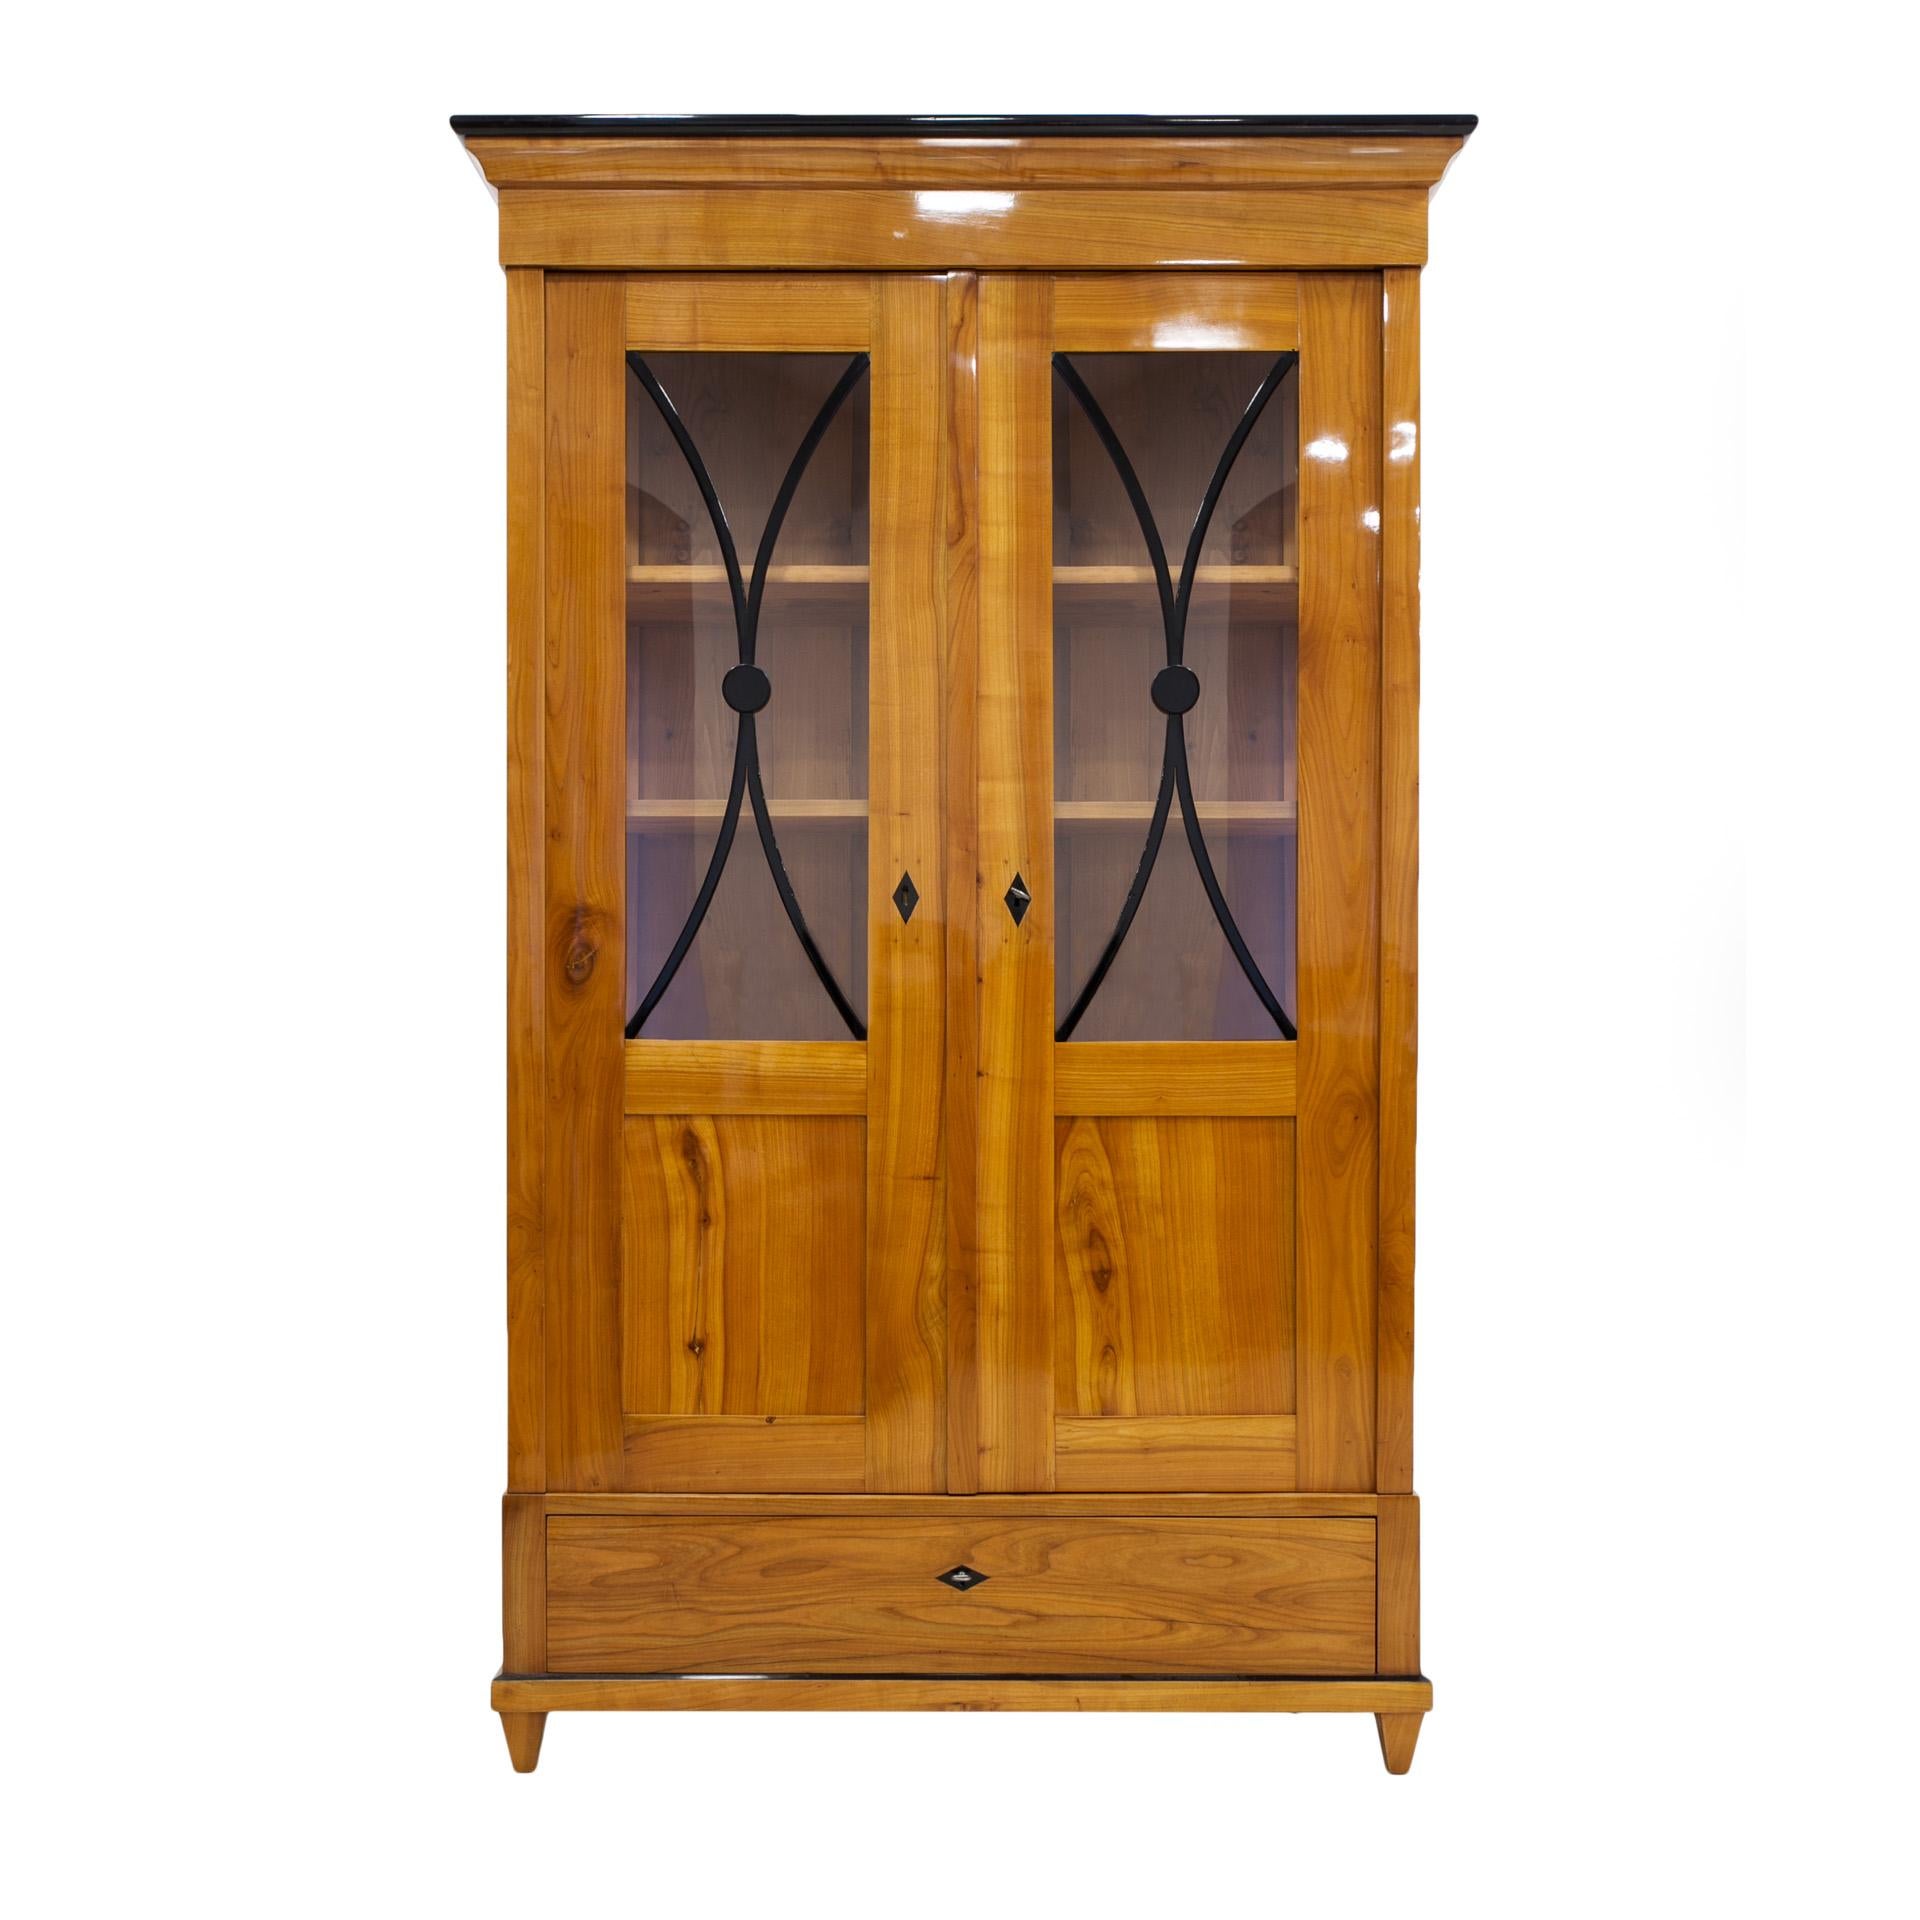 This beautiful cherrywood vitrine comes from Germany from 19th century (the Biedermeier period). The construction is made of solid cherrywood. The piece features practical shelves in the main sections and a spacious drawer at the bottom. It was